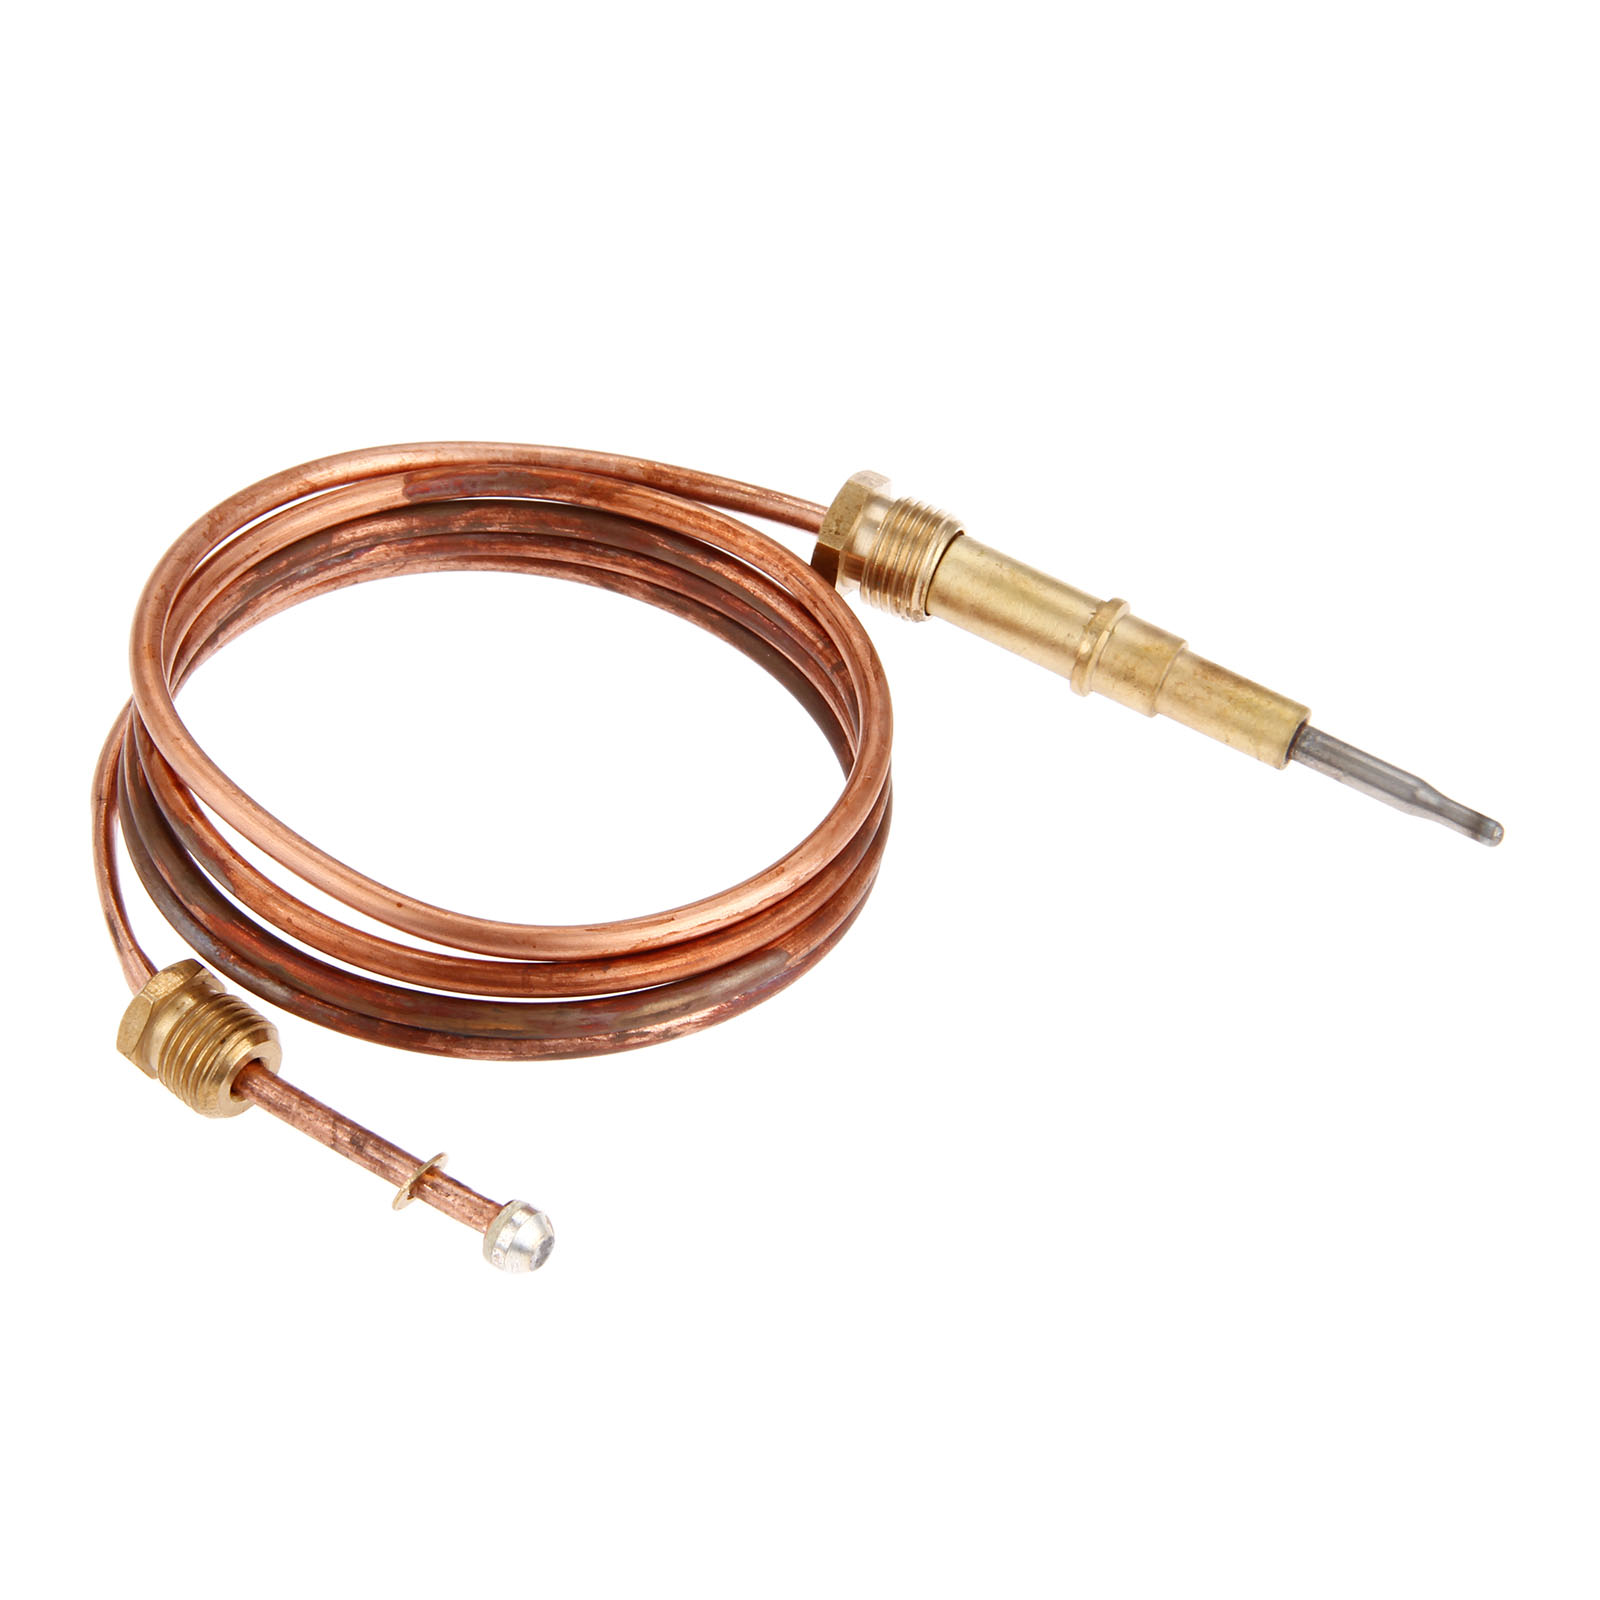 Obobb BBQ Grill Gas Thermocouple,Fireplace,Universal Gas Thermocouple Durable General Heater Accessories Fire Pit Replacement Parts